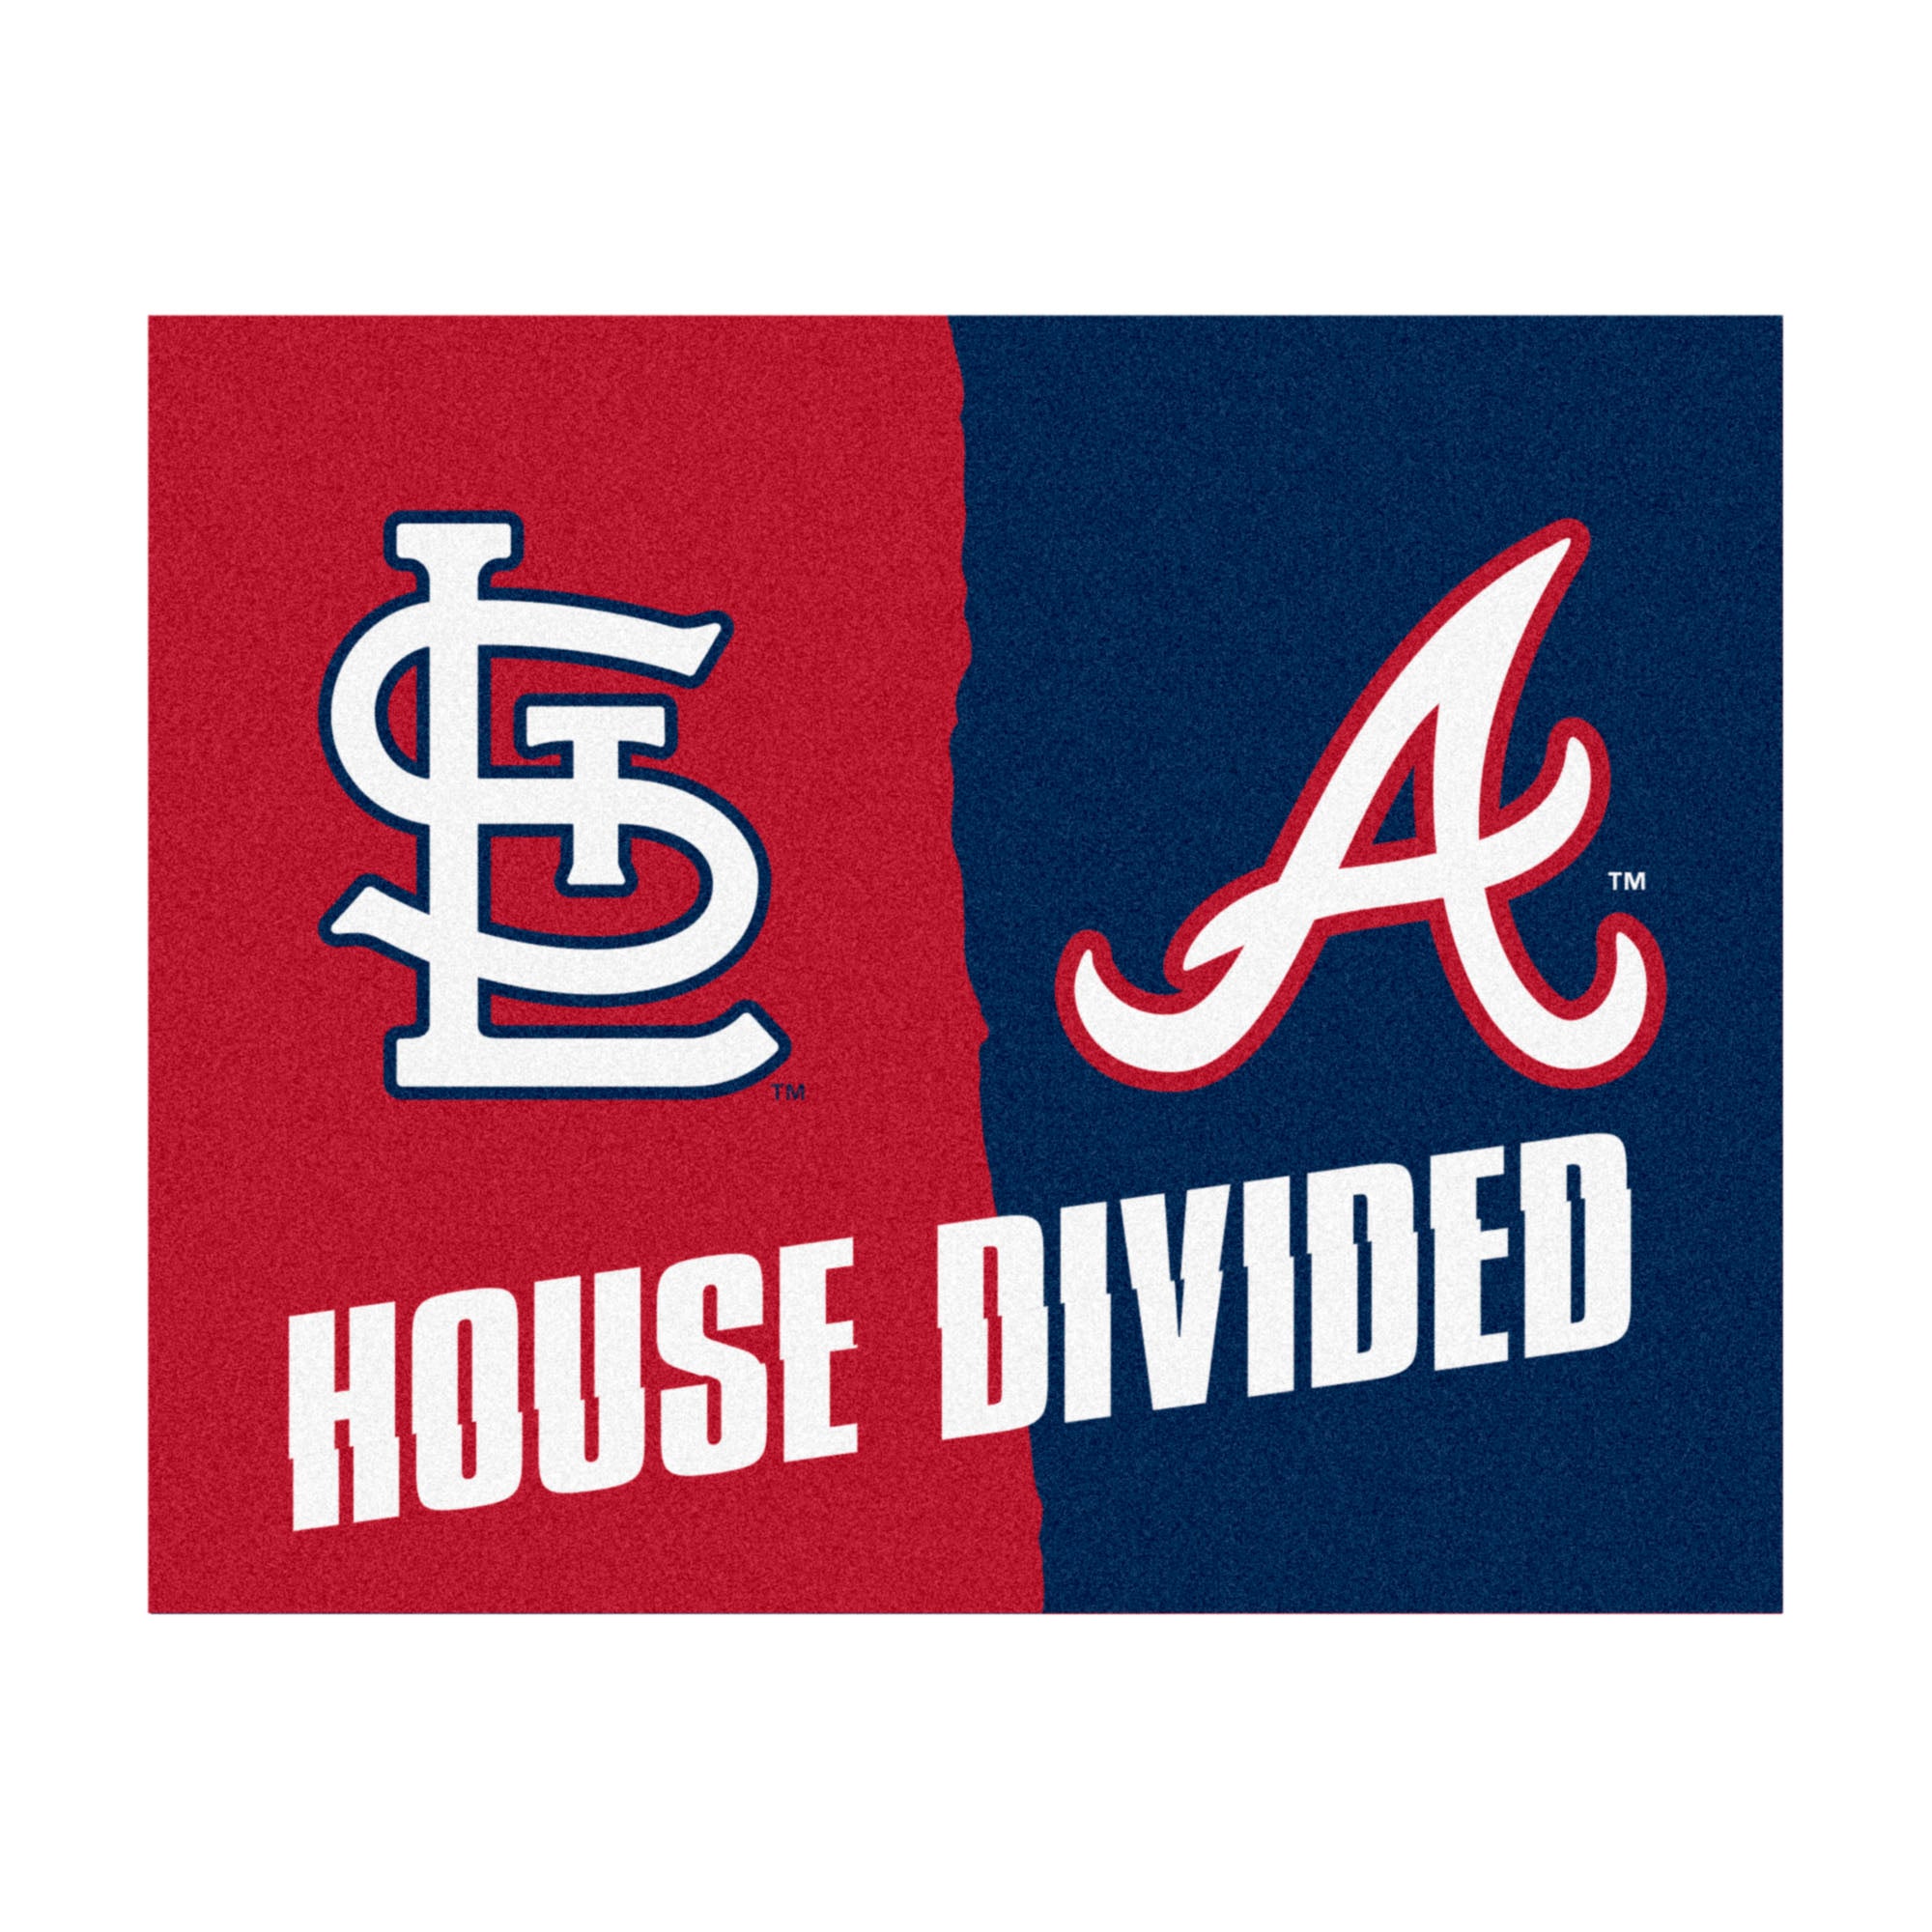 FANMATS, MLB House Divided - Cardinals / Braves House Divided Rug